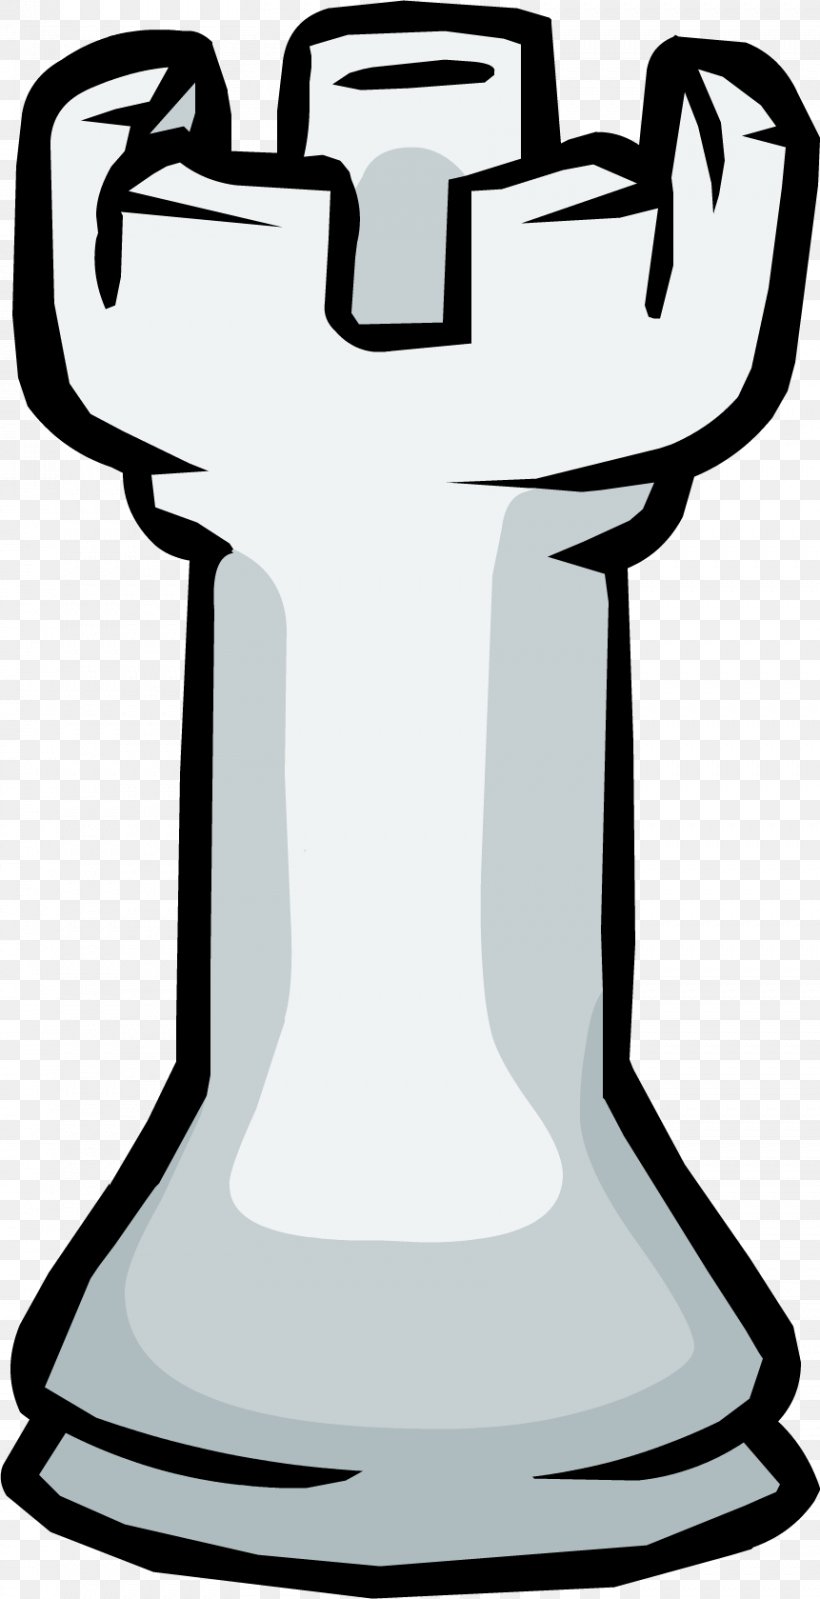 Chess Piece Club Penguin Rook Castling, PNG, 861x1679px, Chess, Artwork, Black And White, Castling, Chess Piece Download Free